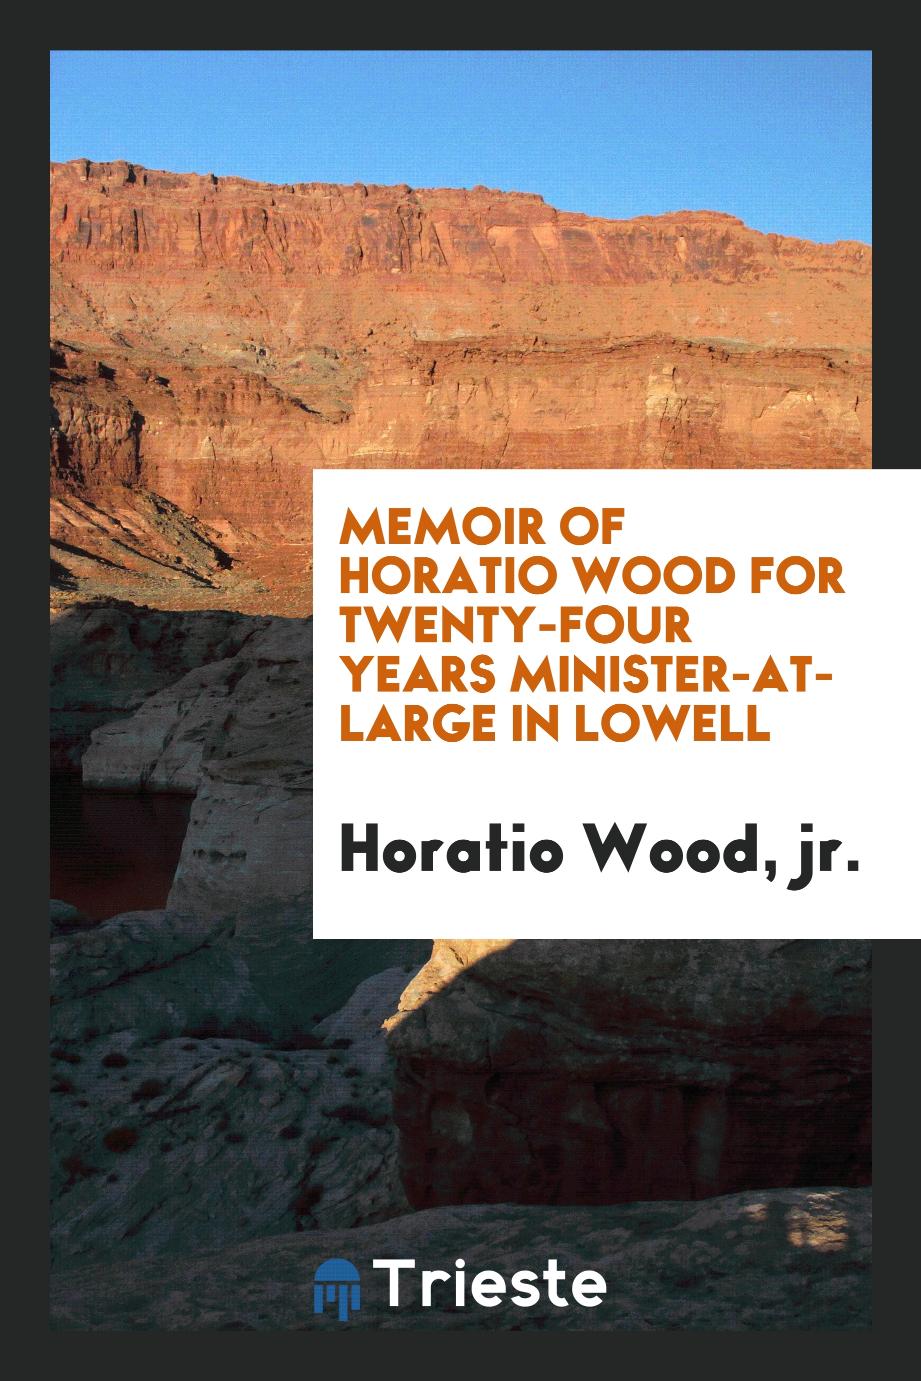 Memoir of Horatio Wood For Twenty-four Years Minister-at-large in Lowell